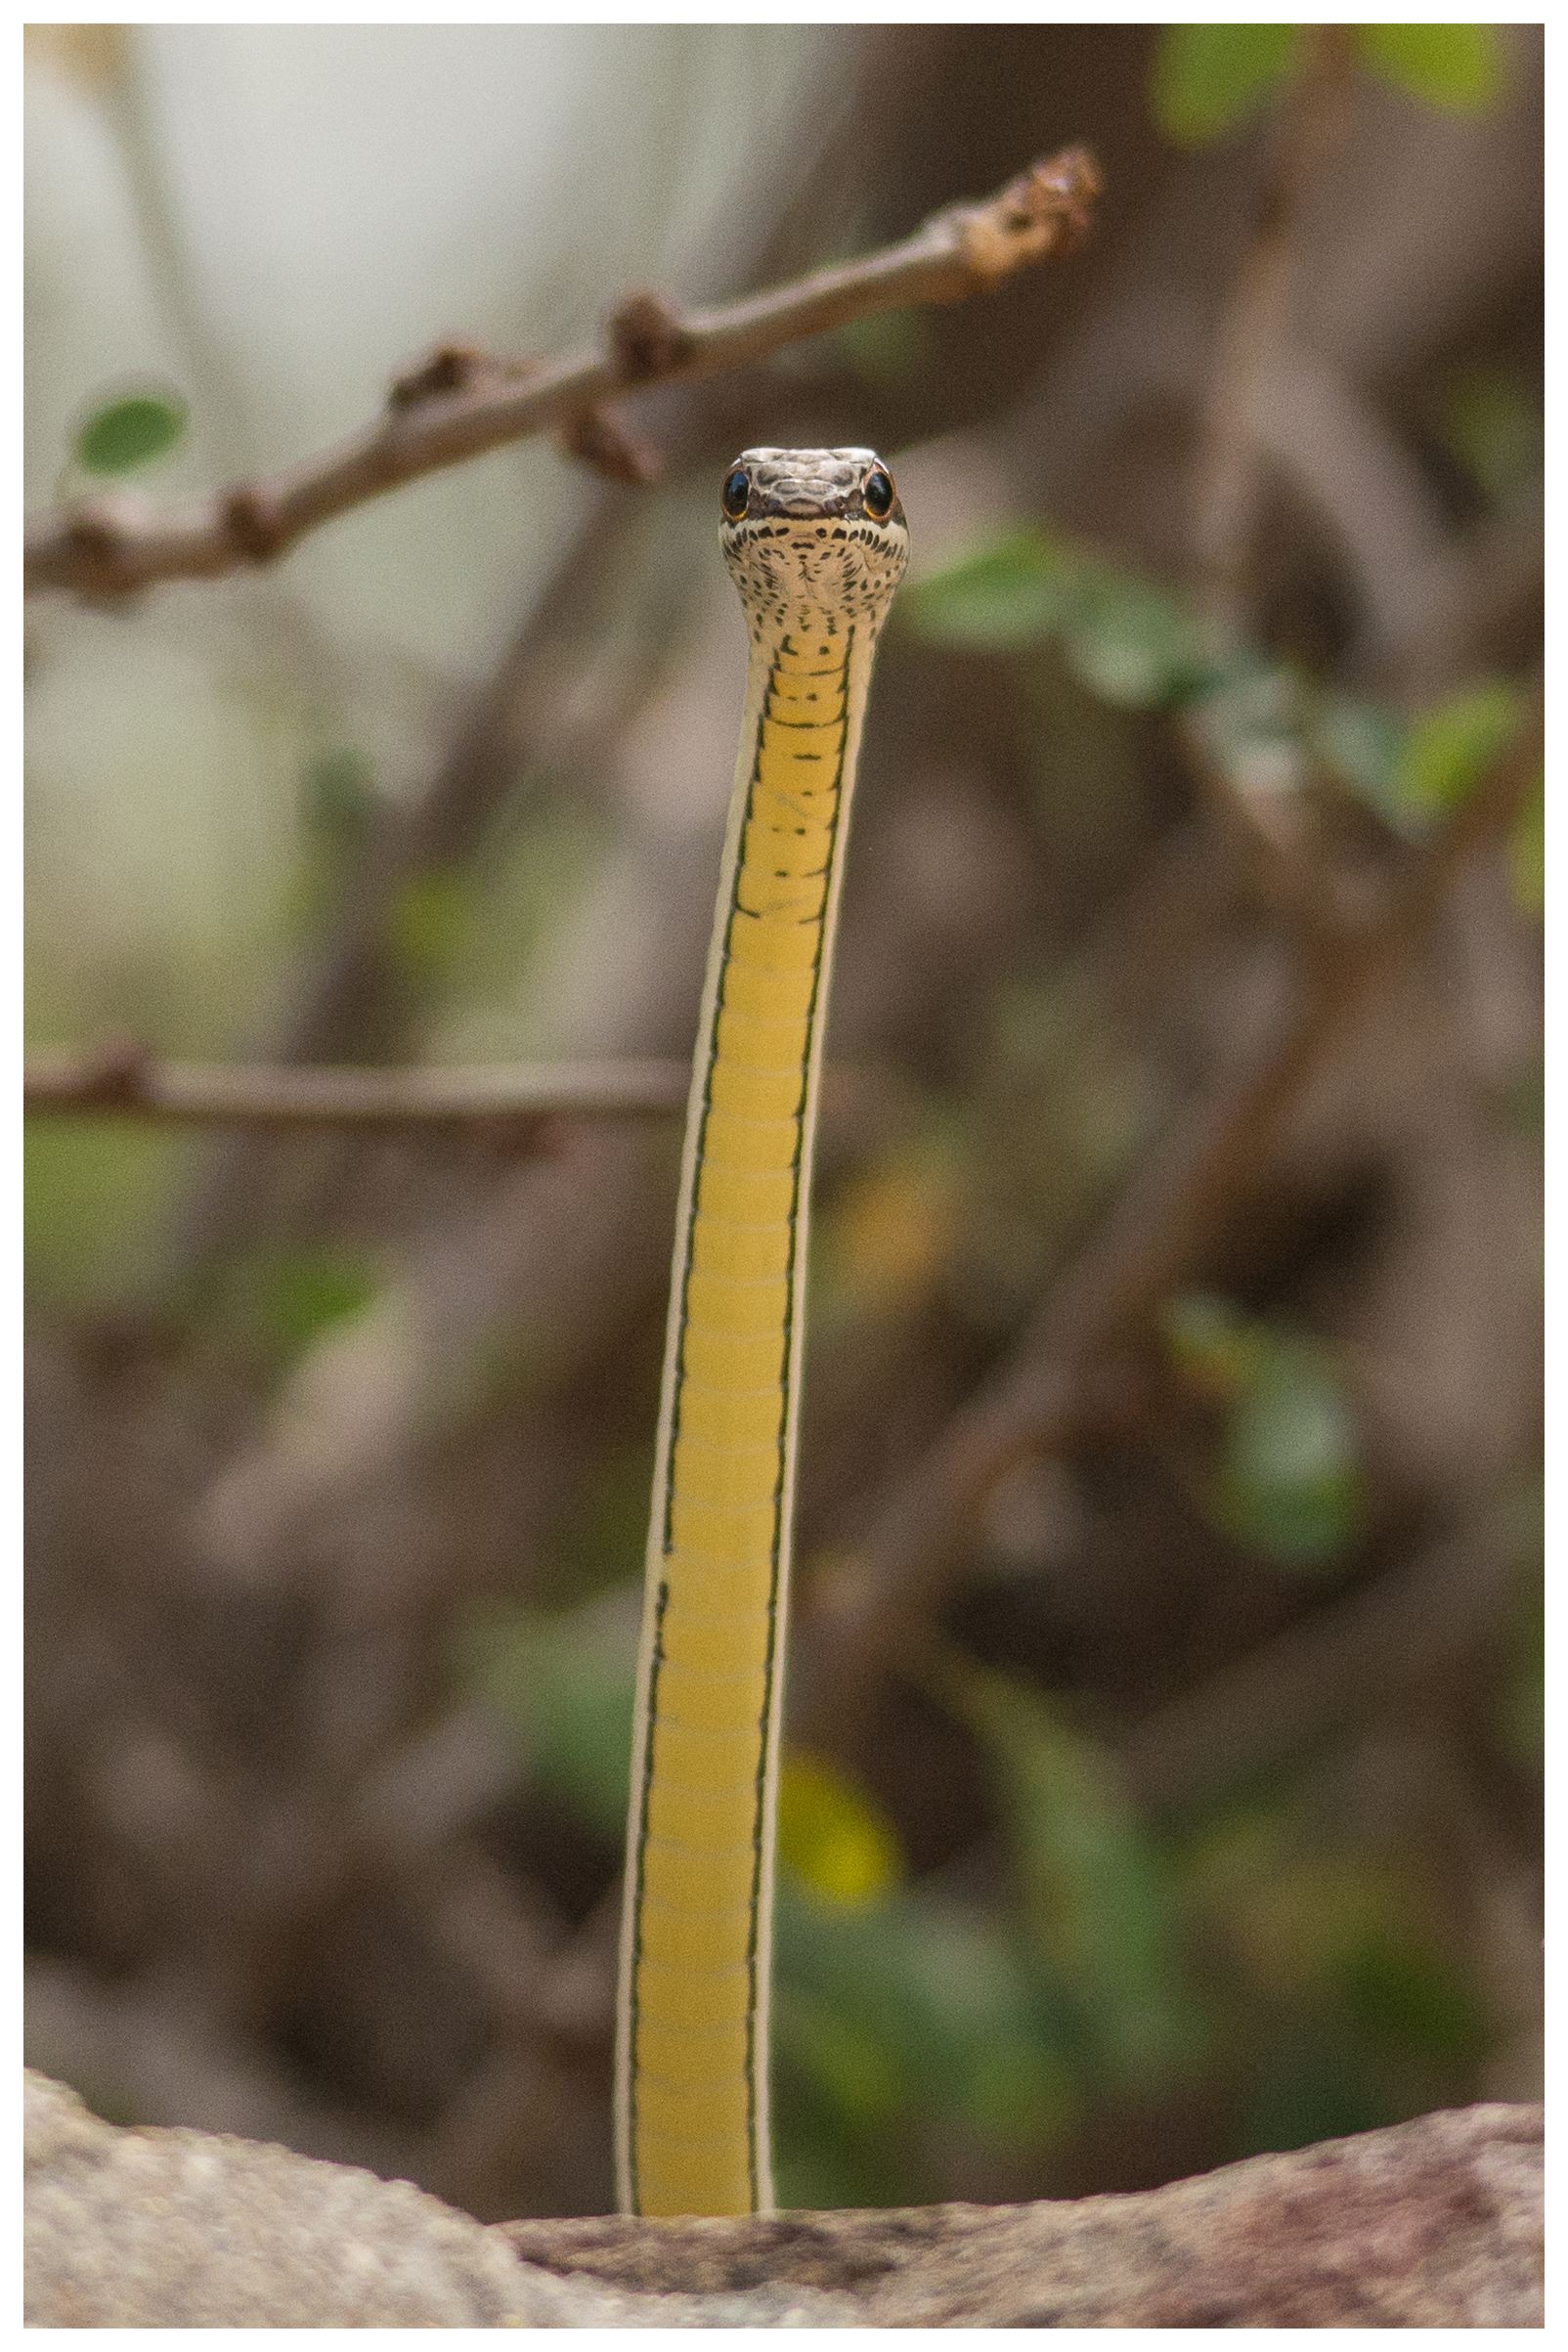 Yellow Bellied Sand Snake, South Africa